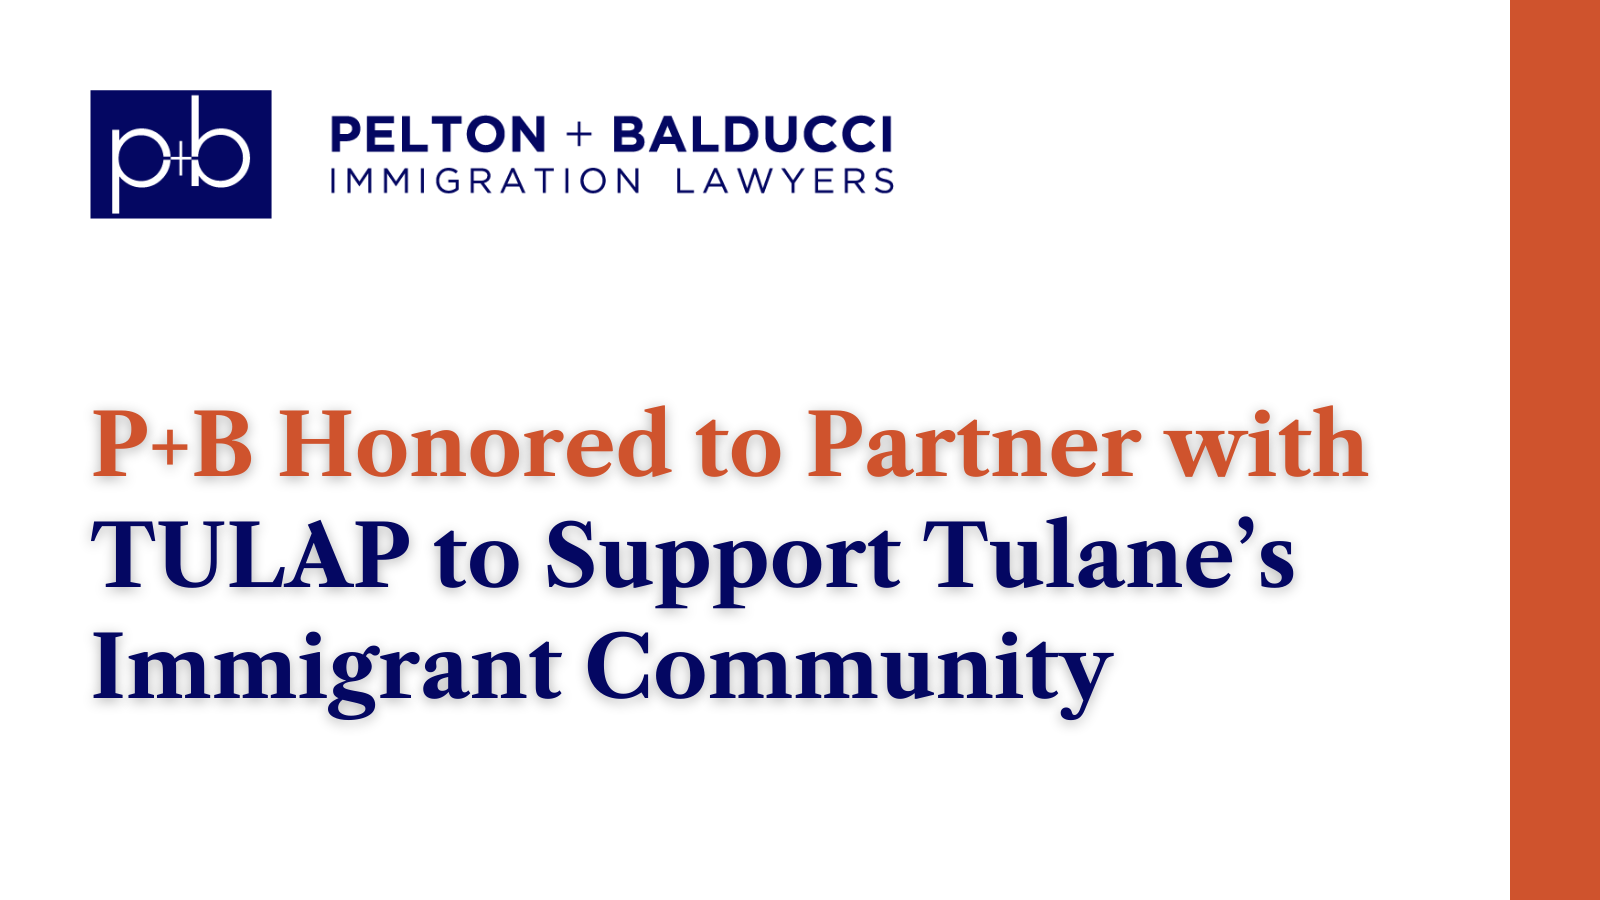 P+B Honored to Partner with TULAP to Support Tulane’s Immigrant Community